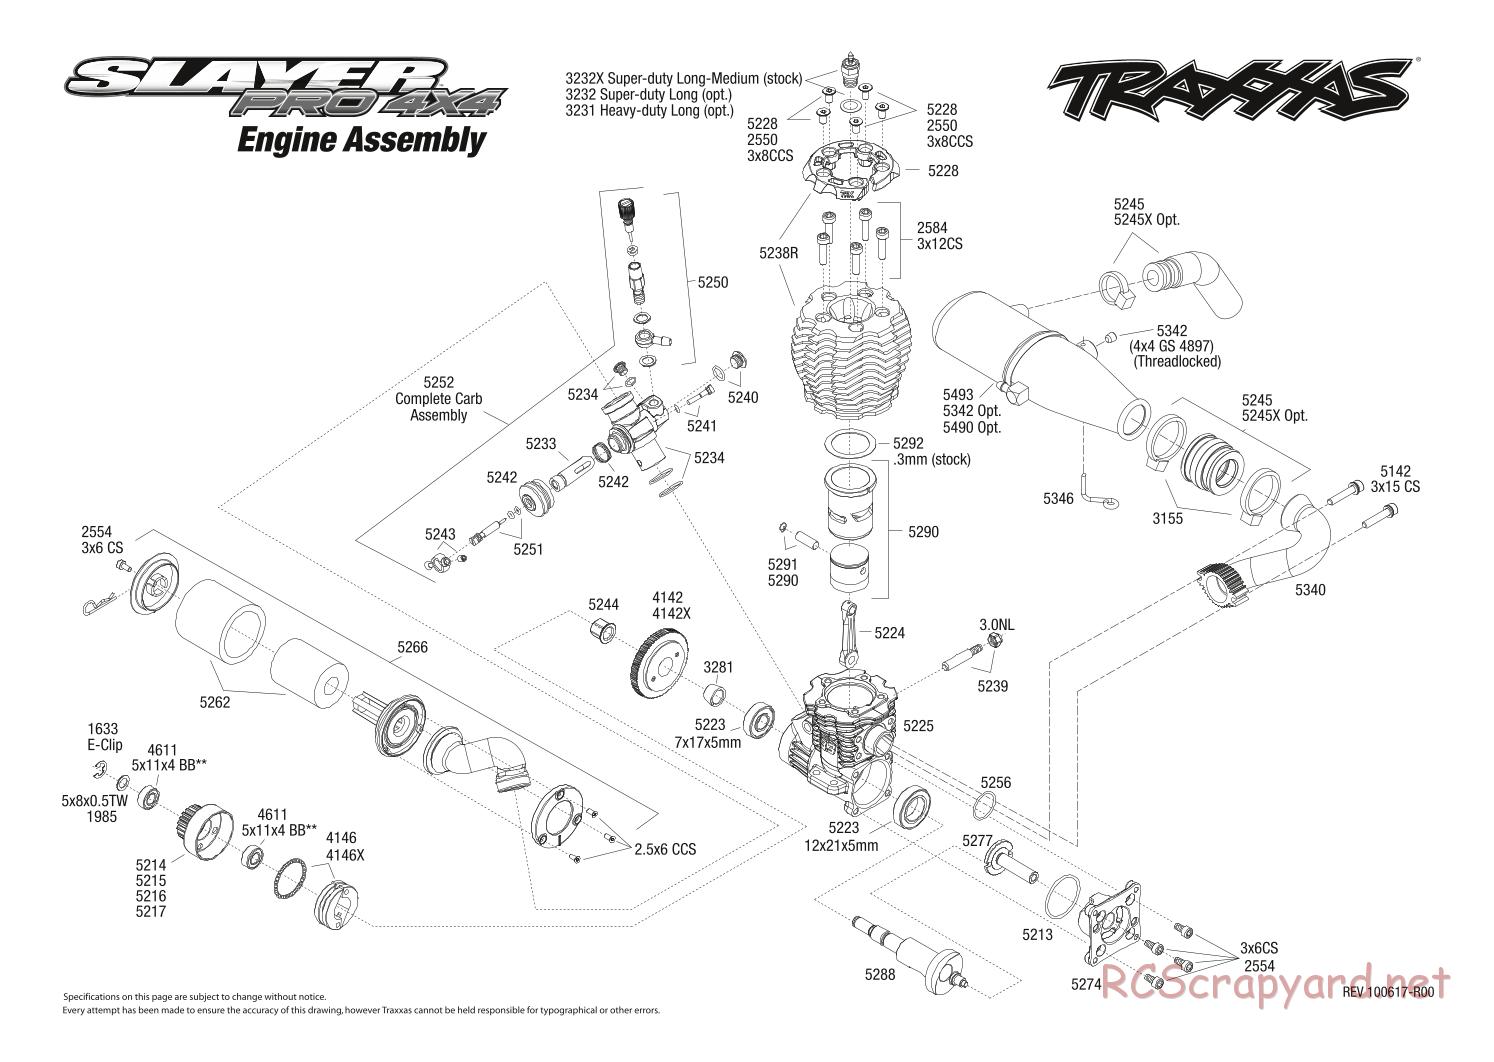 Traxxas - Slayer Pro 4x4 - Exploded Views - Page 2